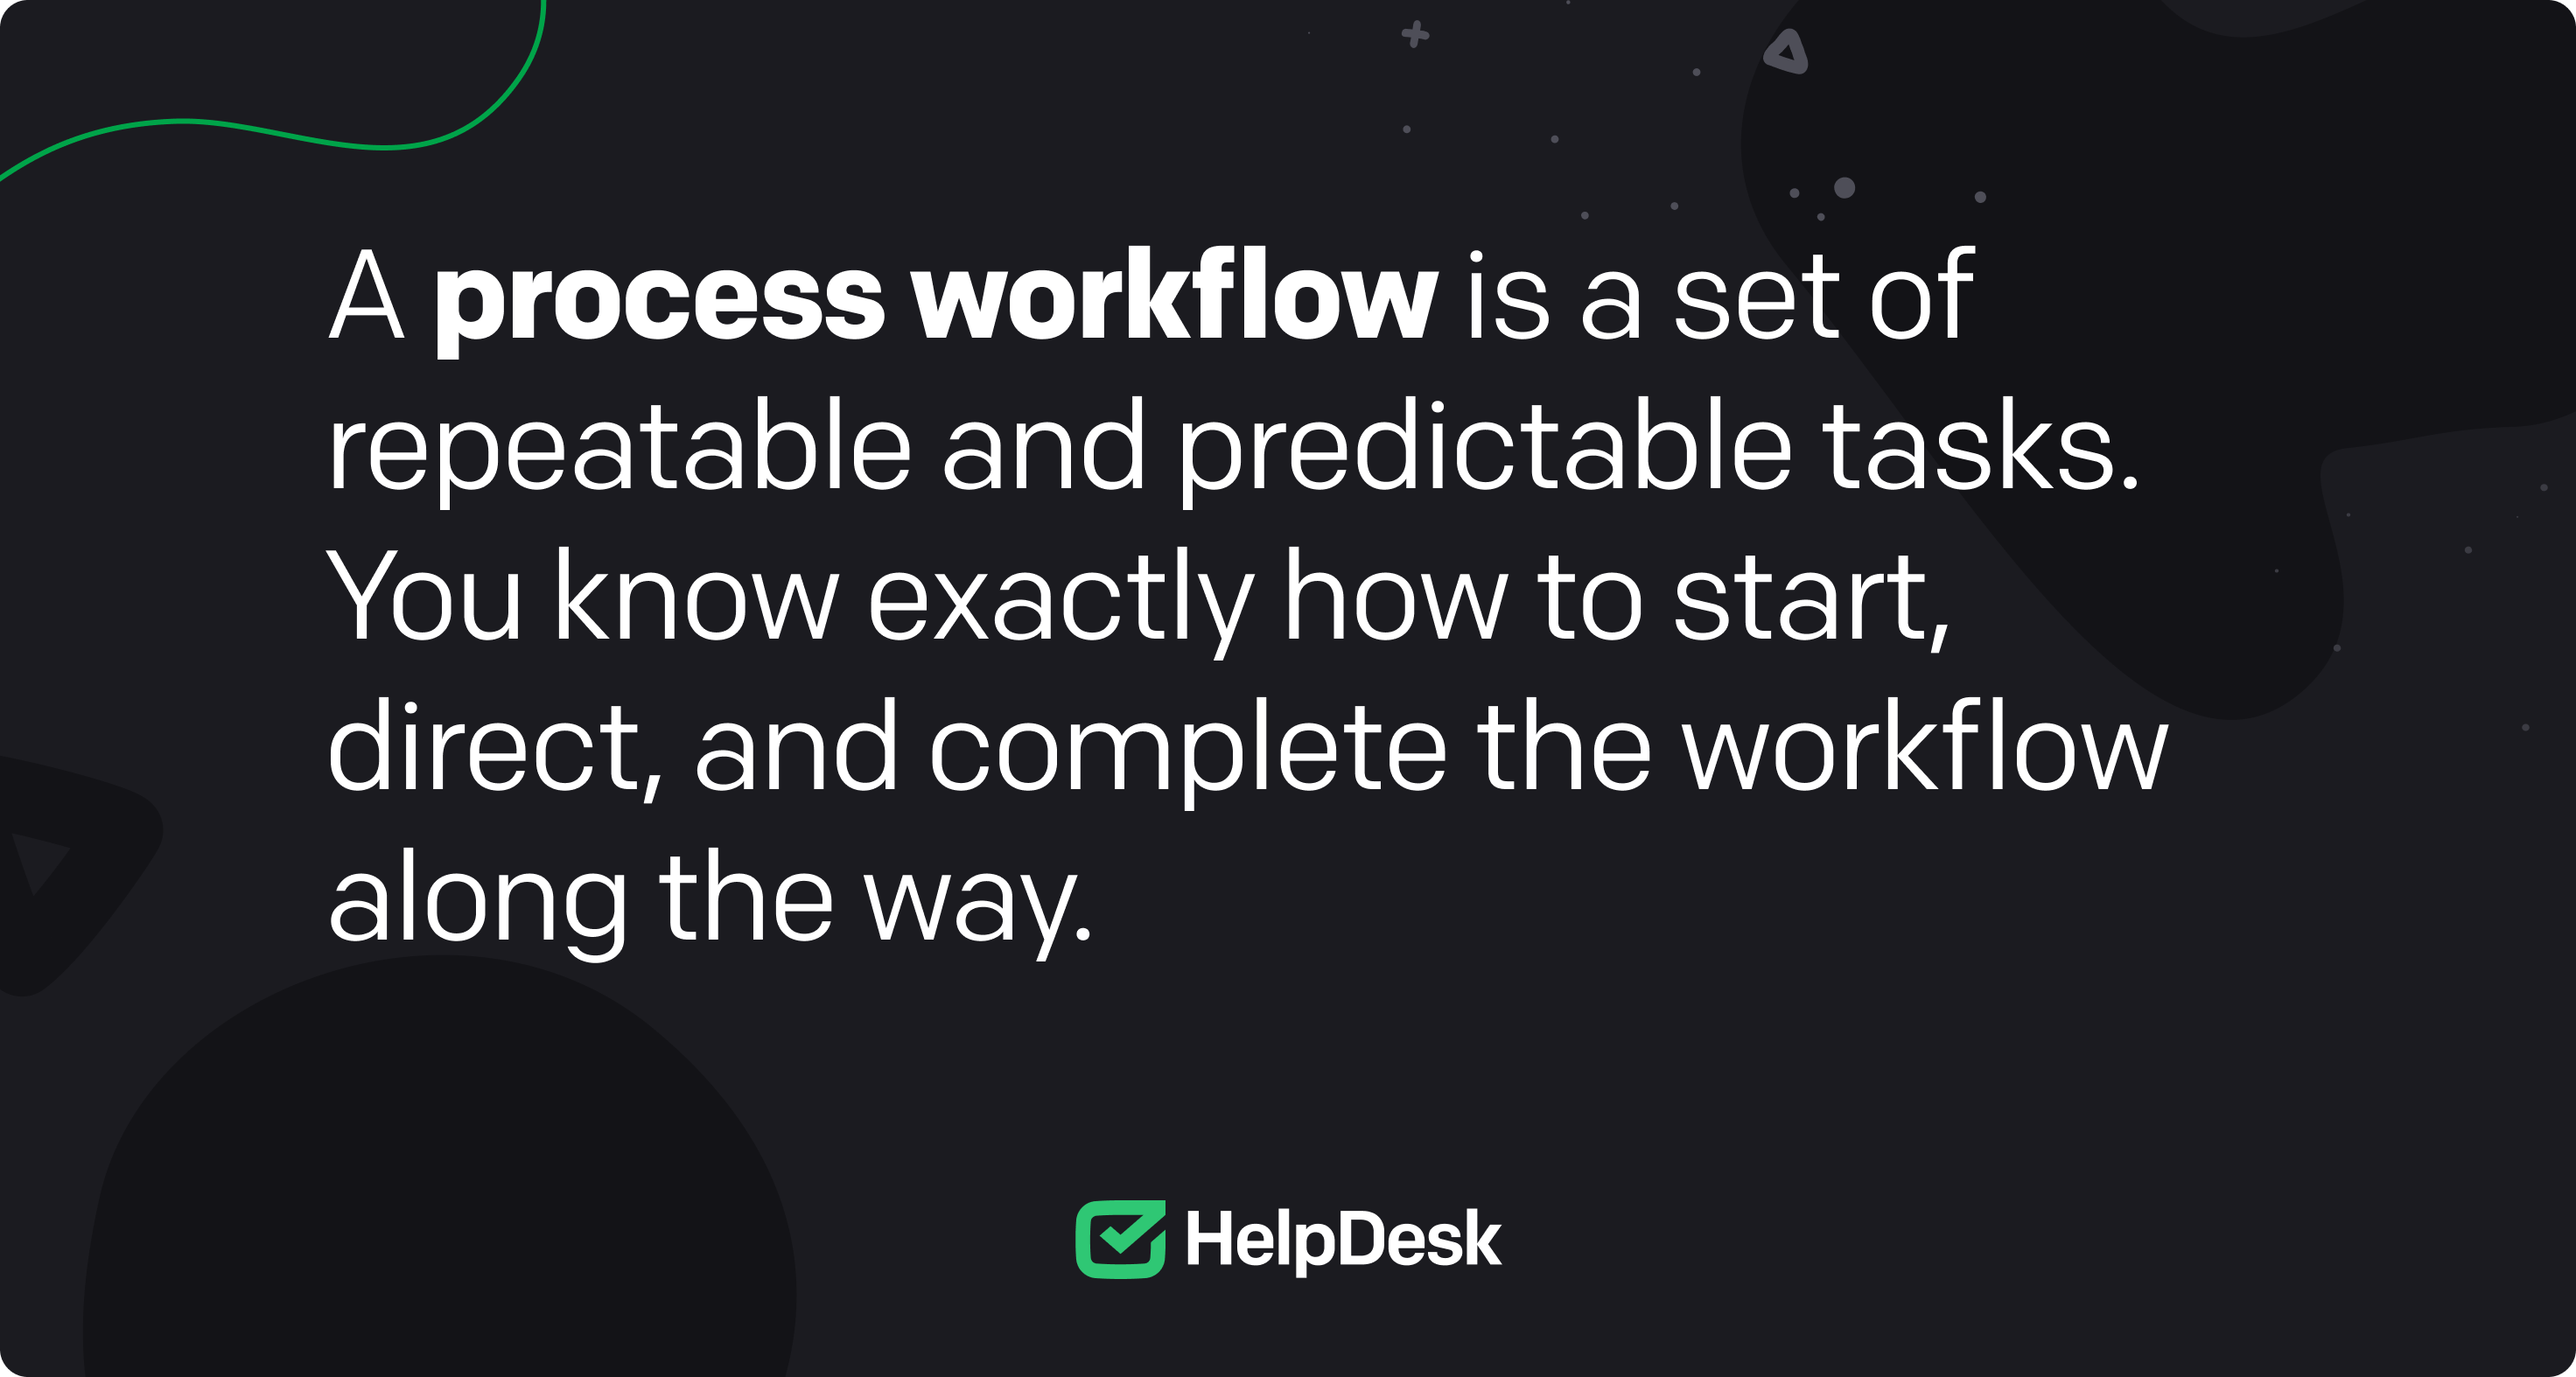 A definition of the process workflow.